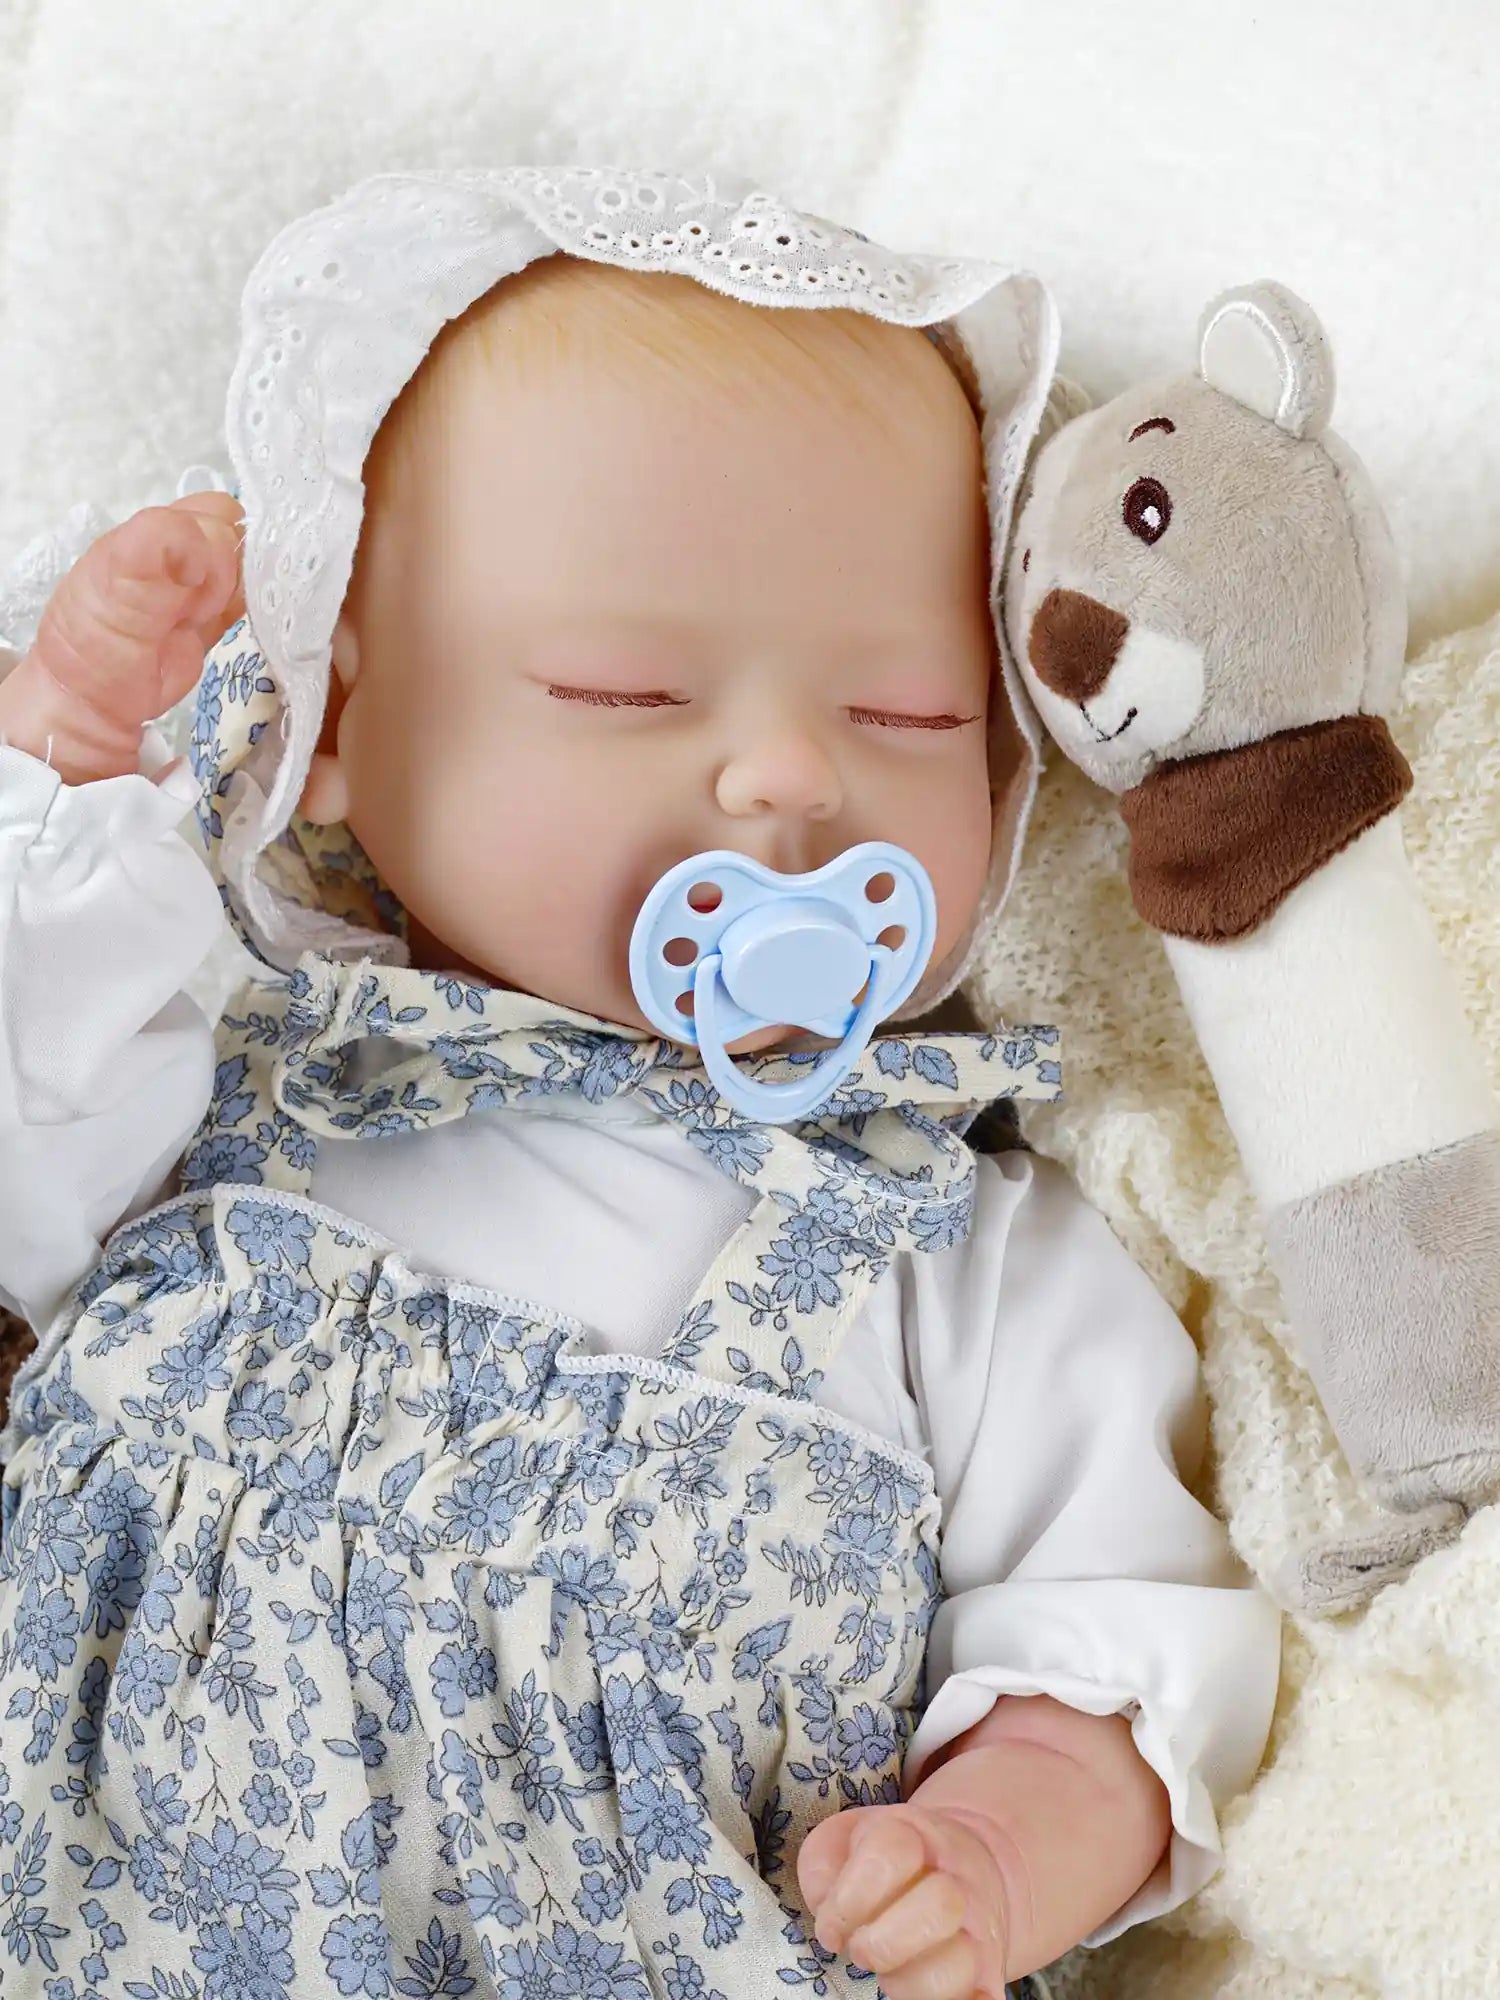 A lifelike reborn doll sleeping peacefully with a blue pacifier in its mouth. The doll is wearing a white and blue floral outfit with a lace bonnet and is holding a plush toy